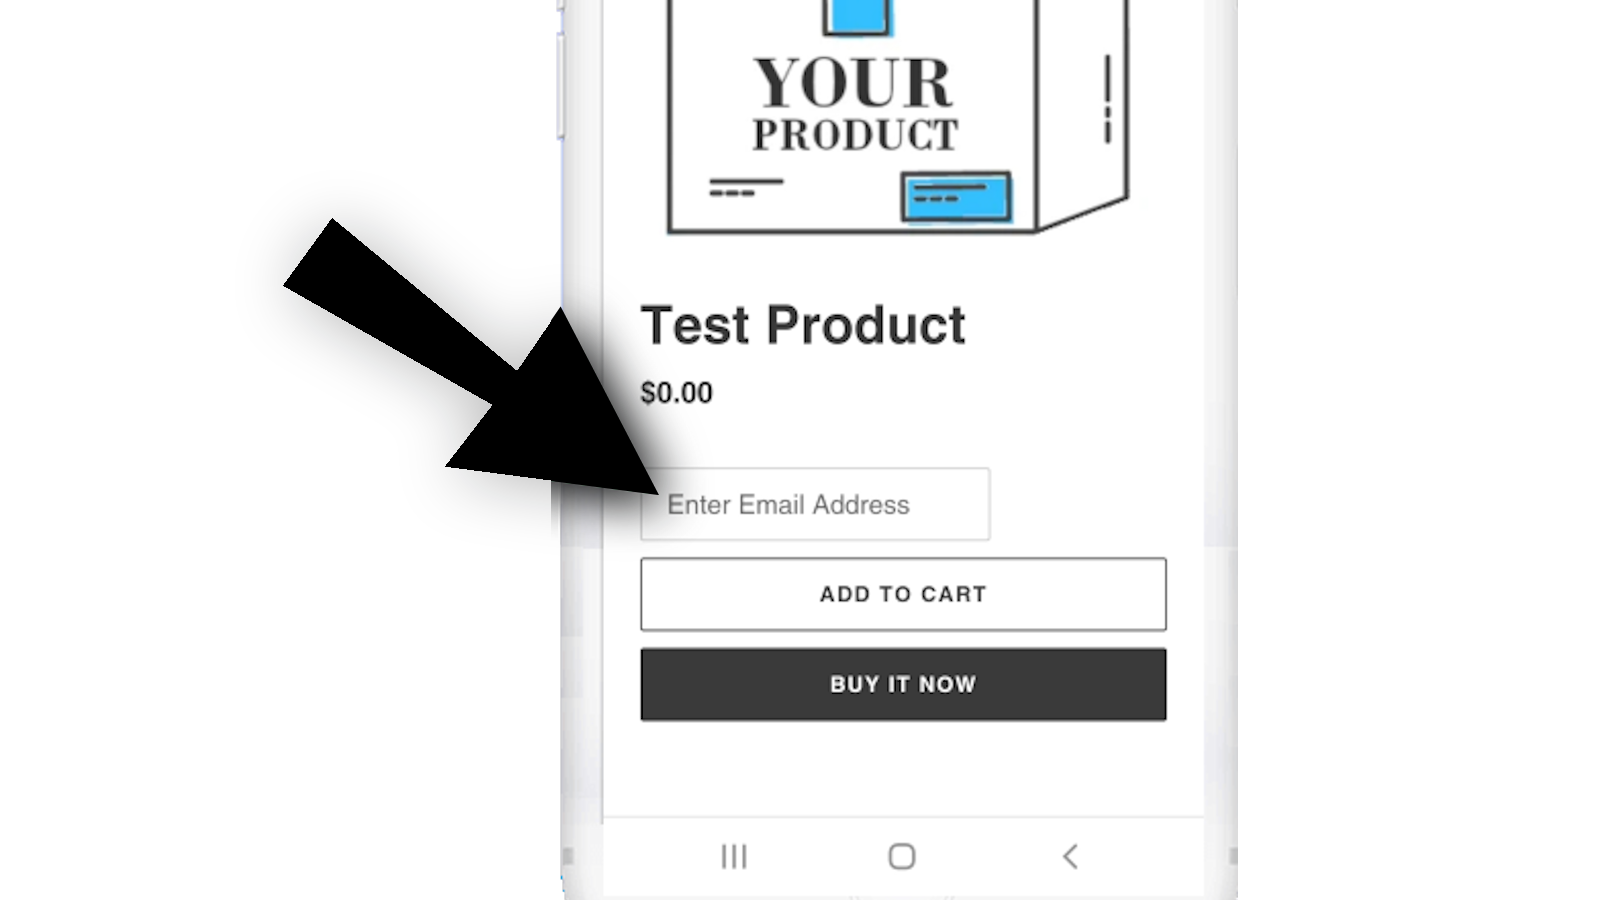 An email field is added above the add-to-cart button